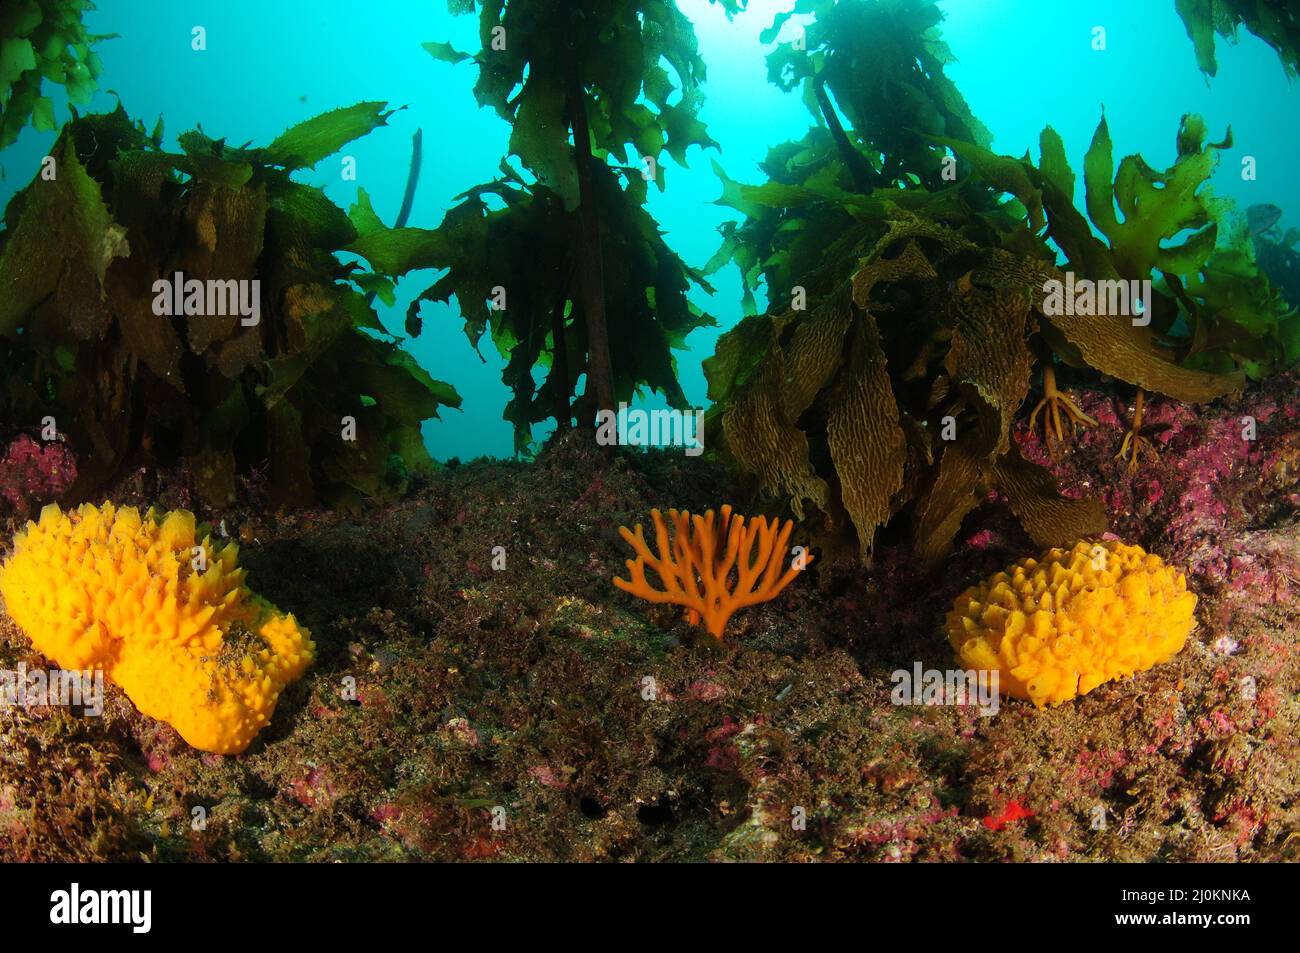 Yellow nipple sponges and orange tree-like sponge on rocky reef under canopy of kelp forest. Location: Leigh New Zealand Stock Photo